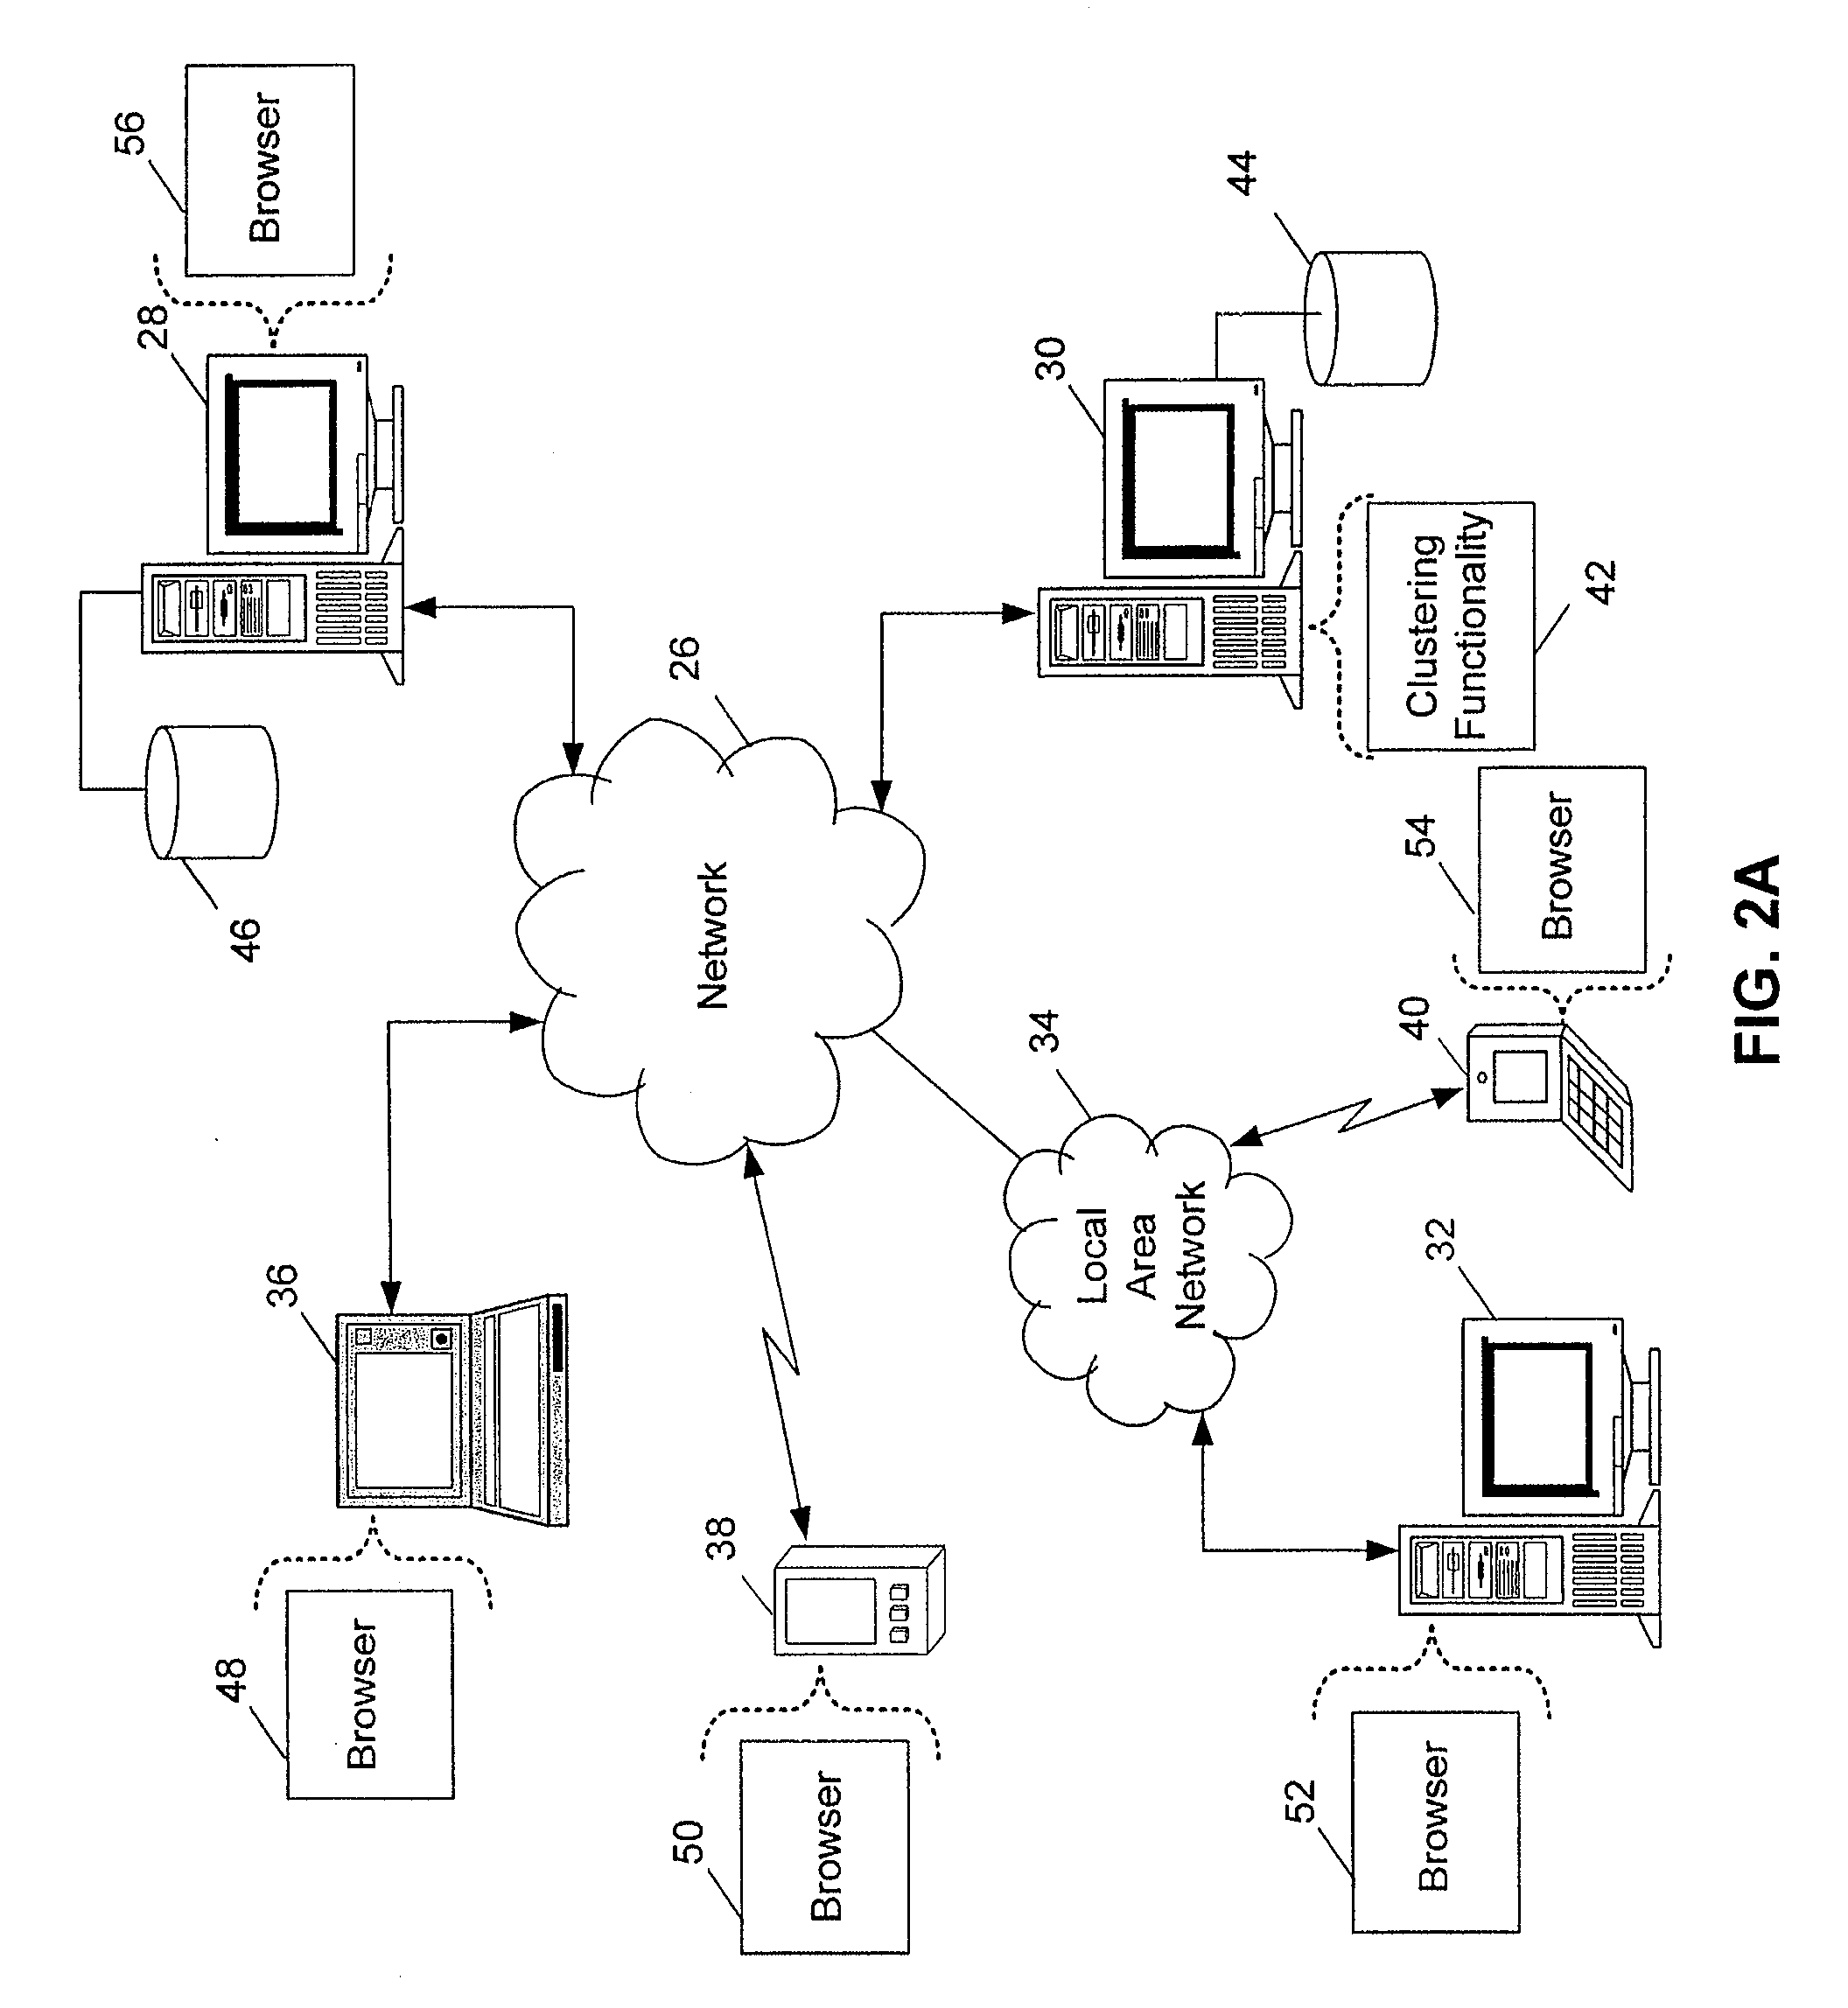 System and Method for Scheduling Meetings